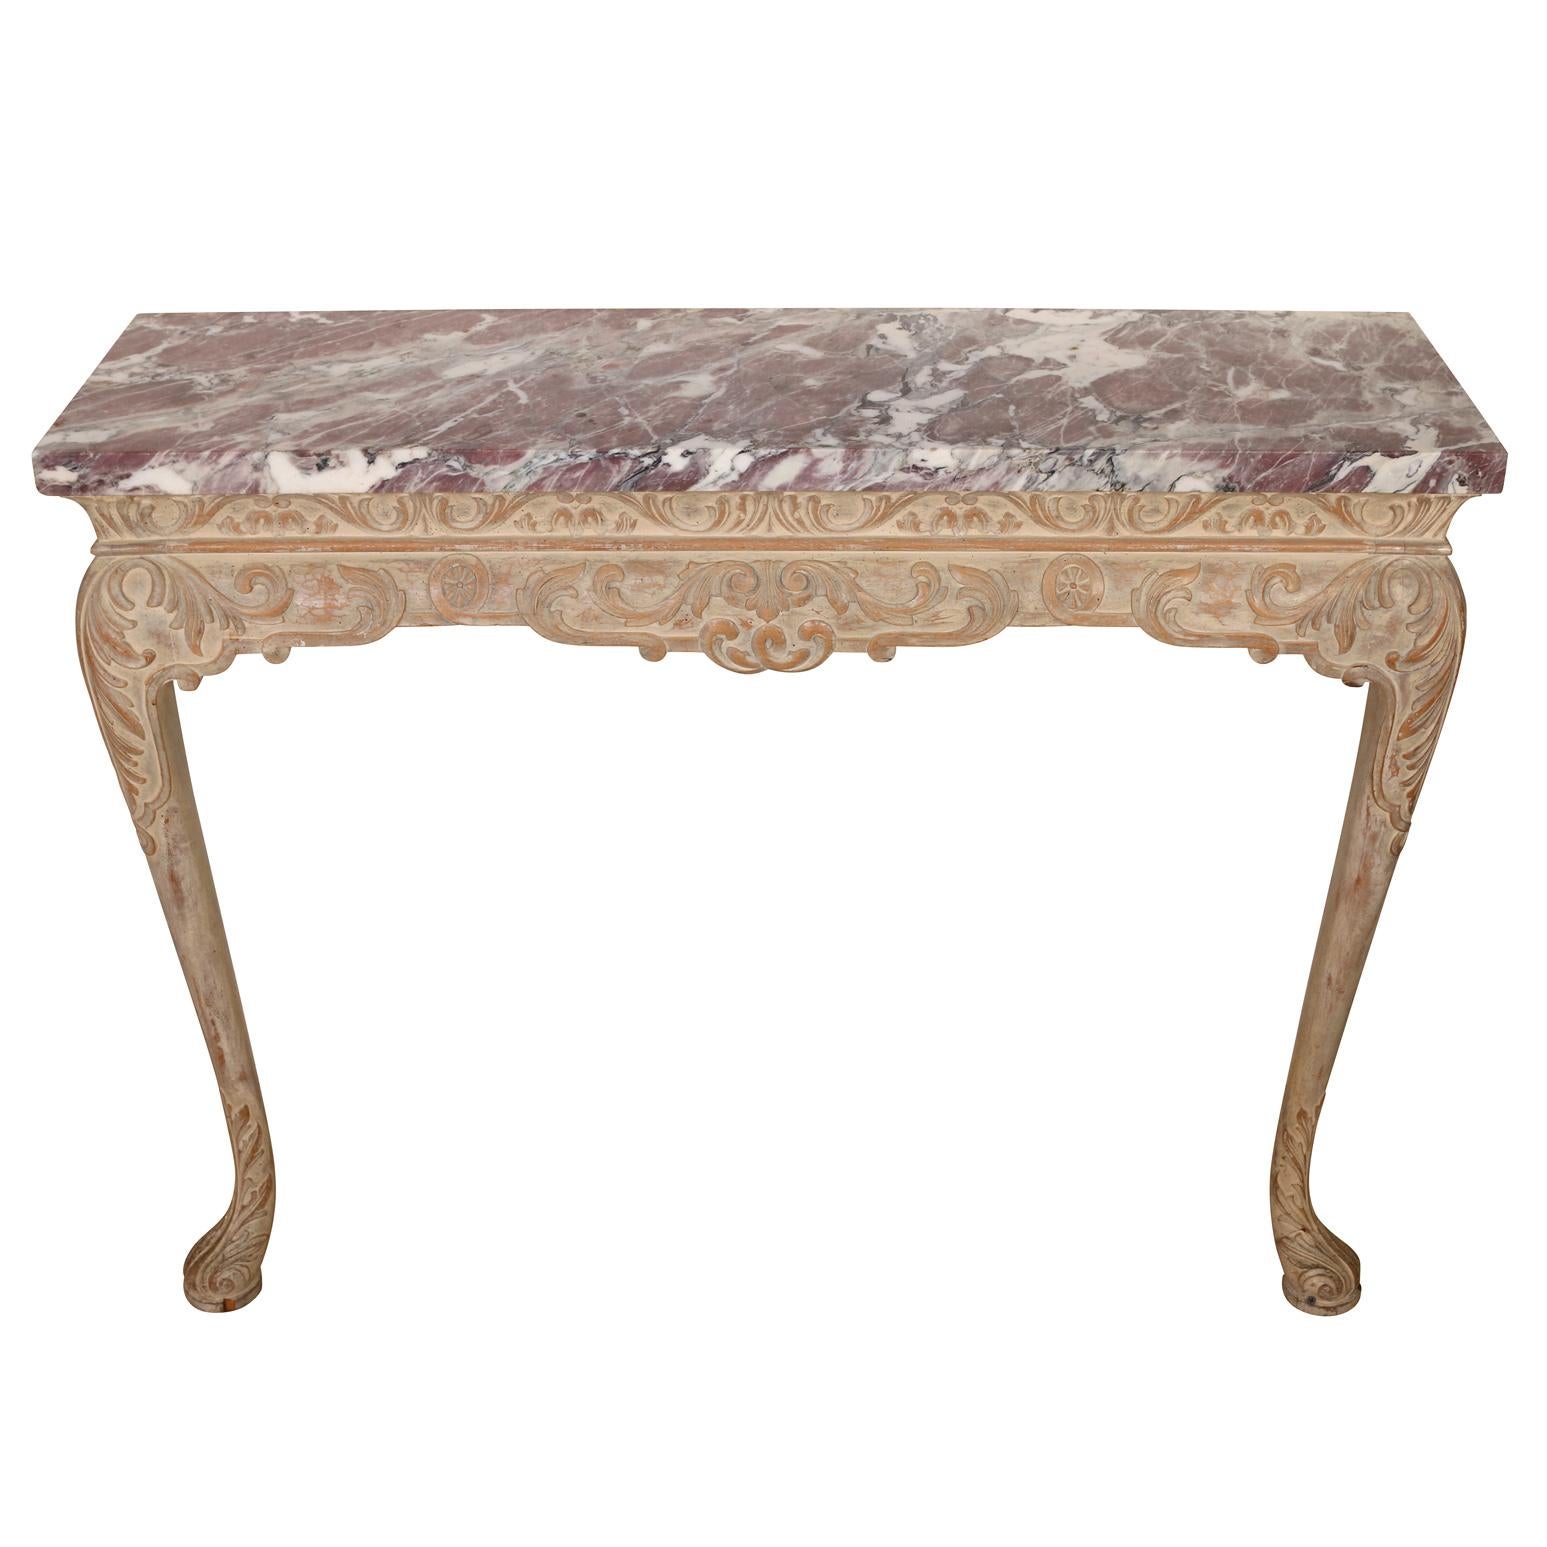 A pair of George I style, wall mount pier tables with carved and painted legs and apron, and a rose colored marble top.